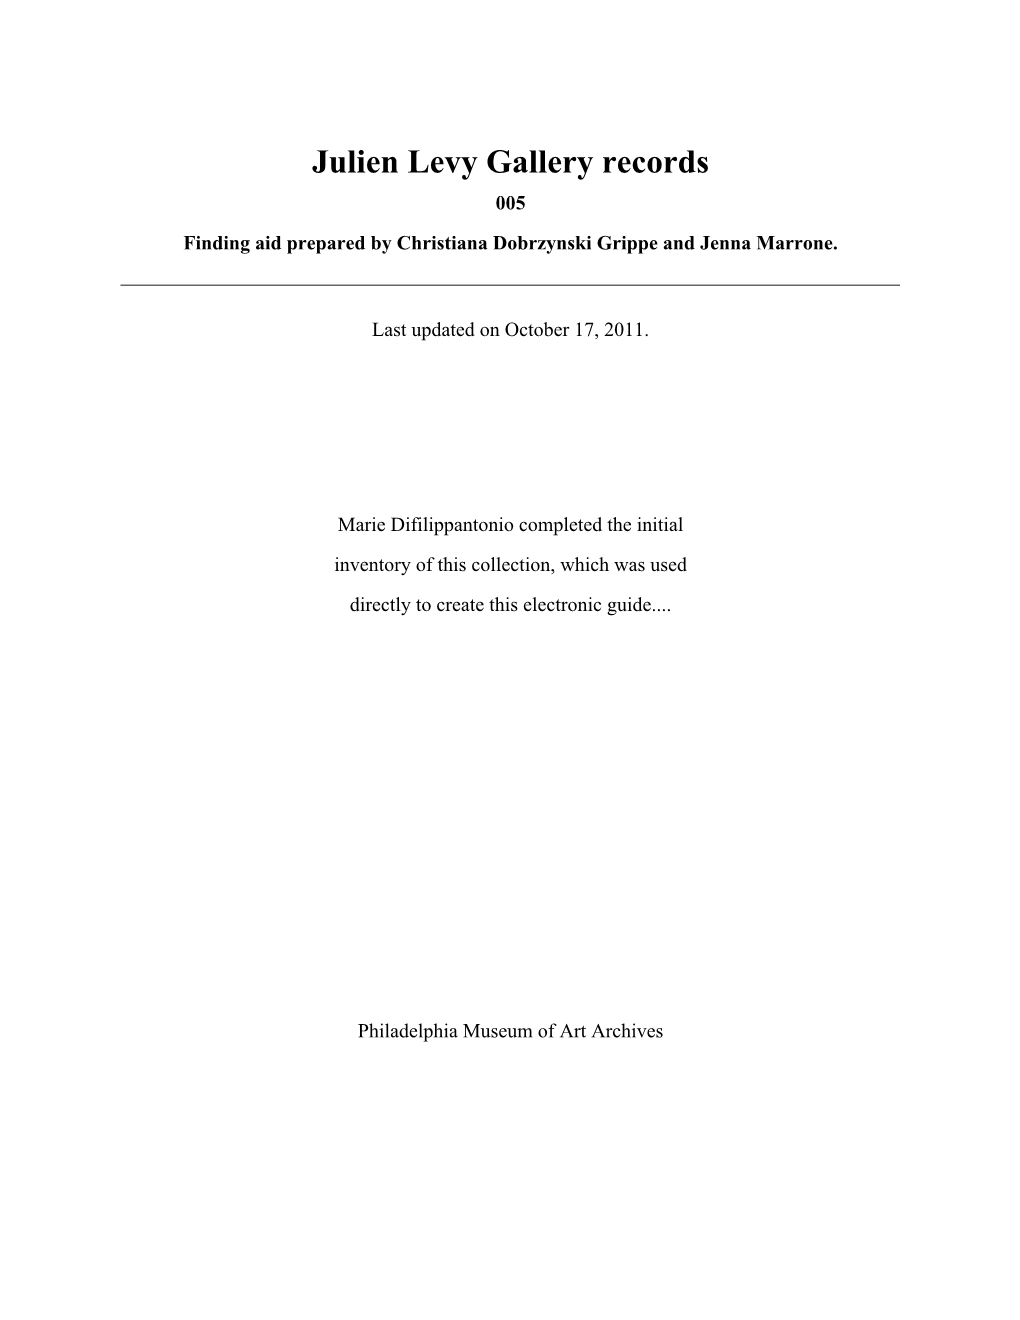 Julien Levy Gallery Records 005 Finding Aid Prepared by Christiana Dobrzynski Grippe and Jenna Marrone